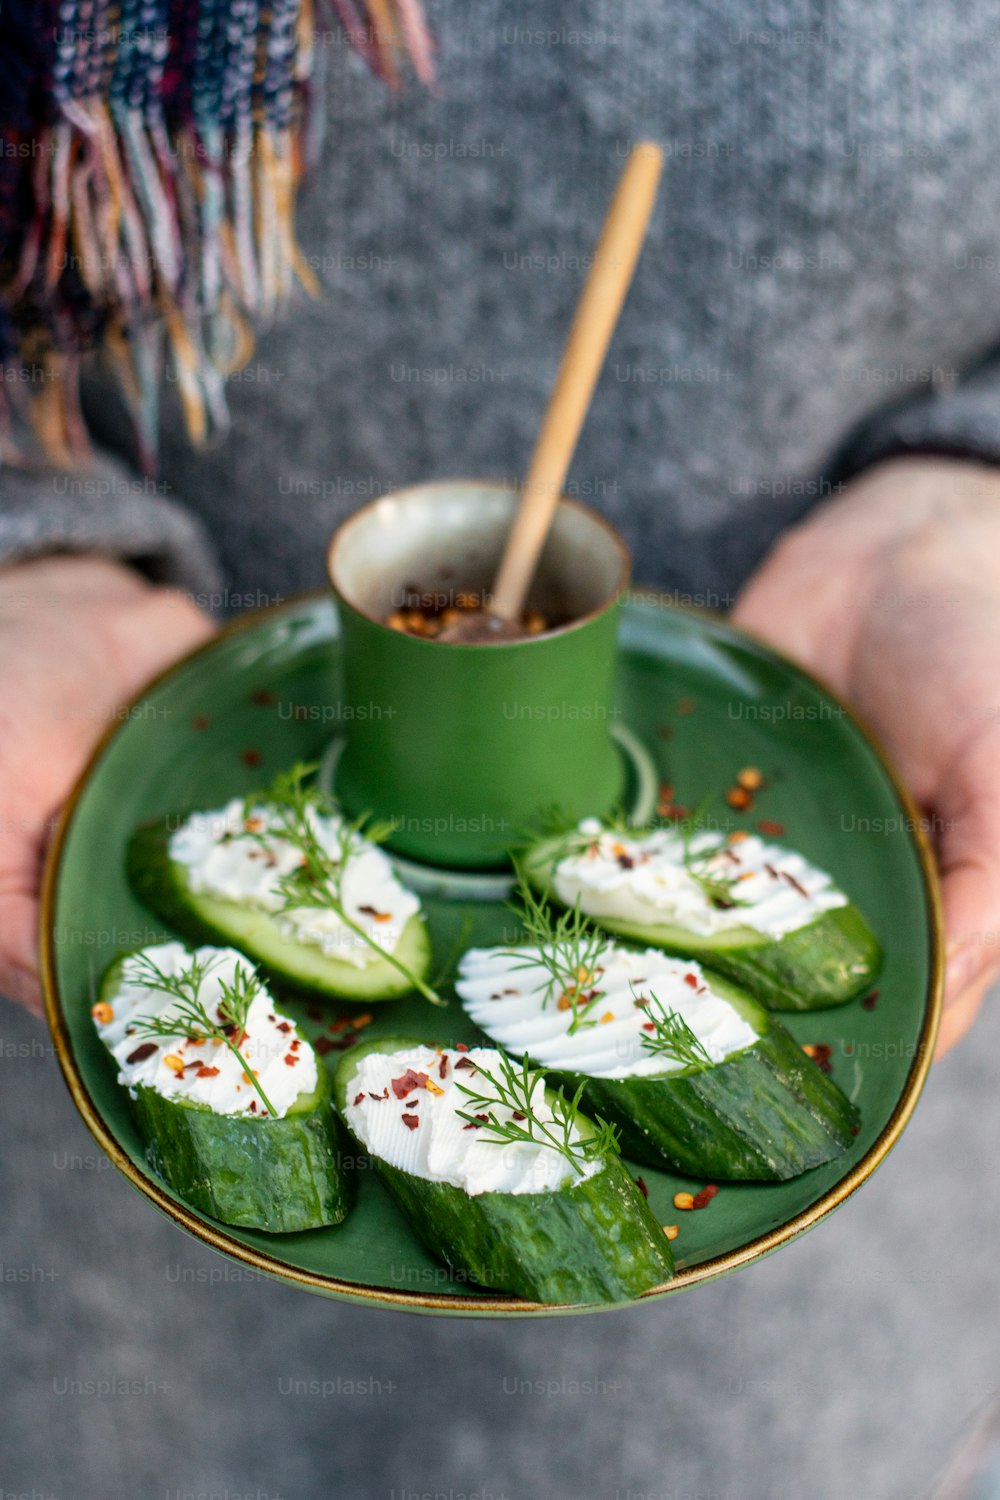 a person holding a green plate with cucumbers on it